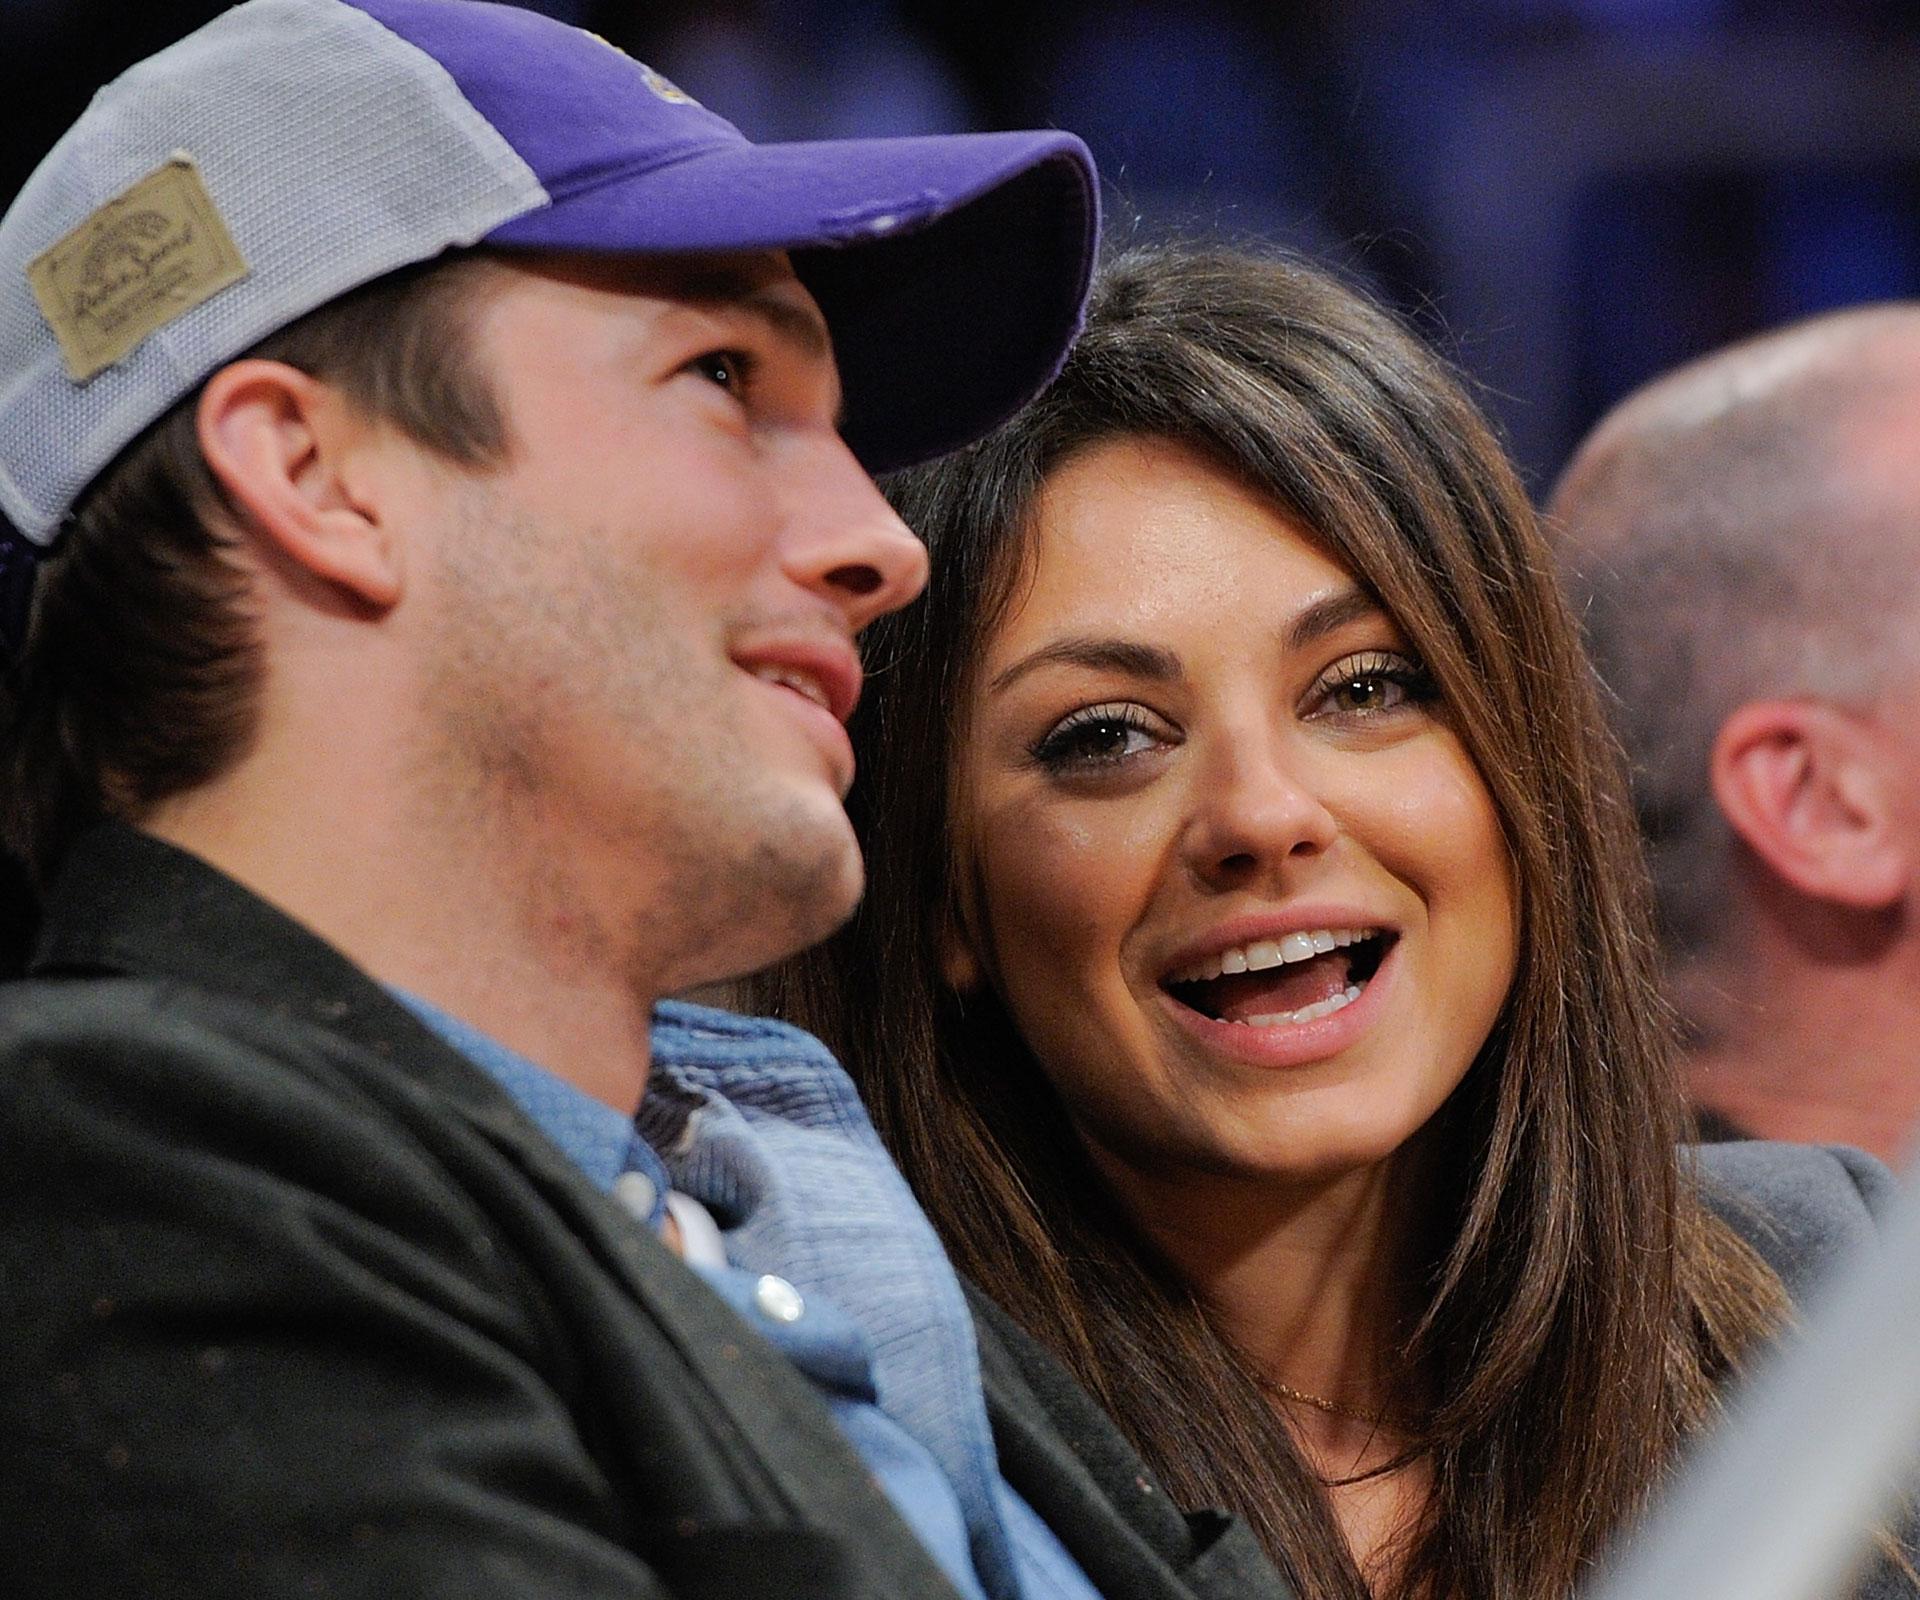 Are wedding bells on the way for Mila and Ashton?